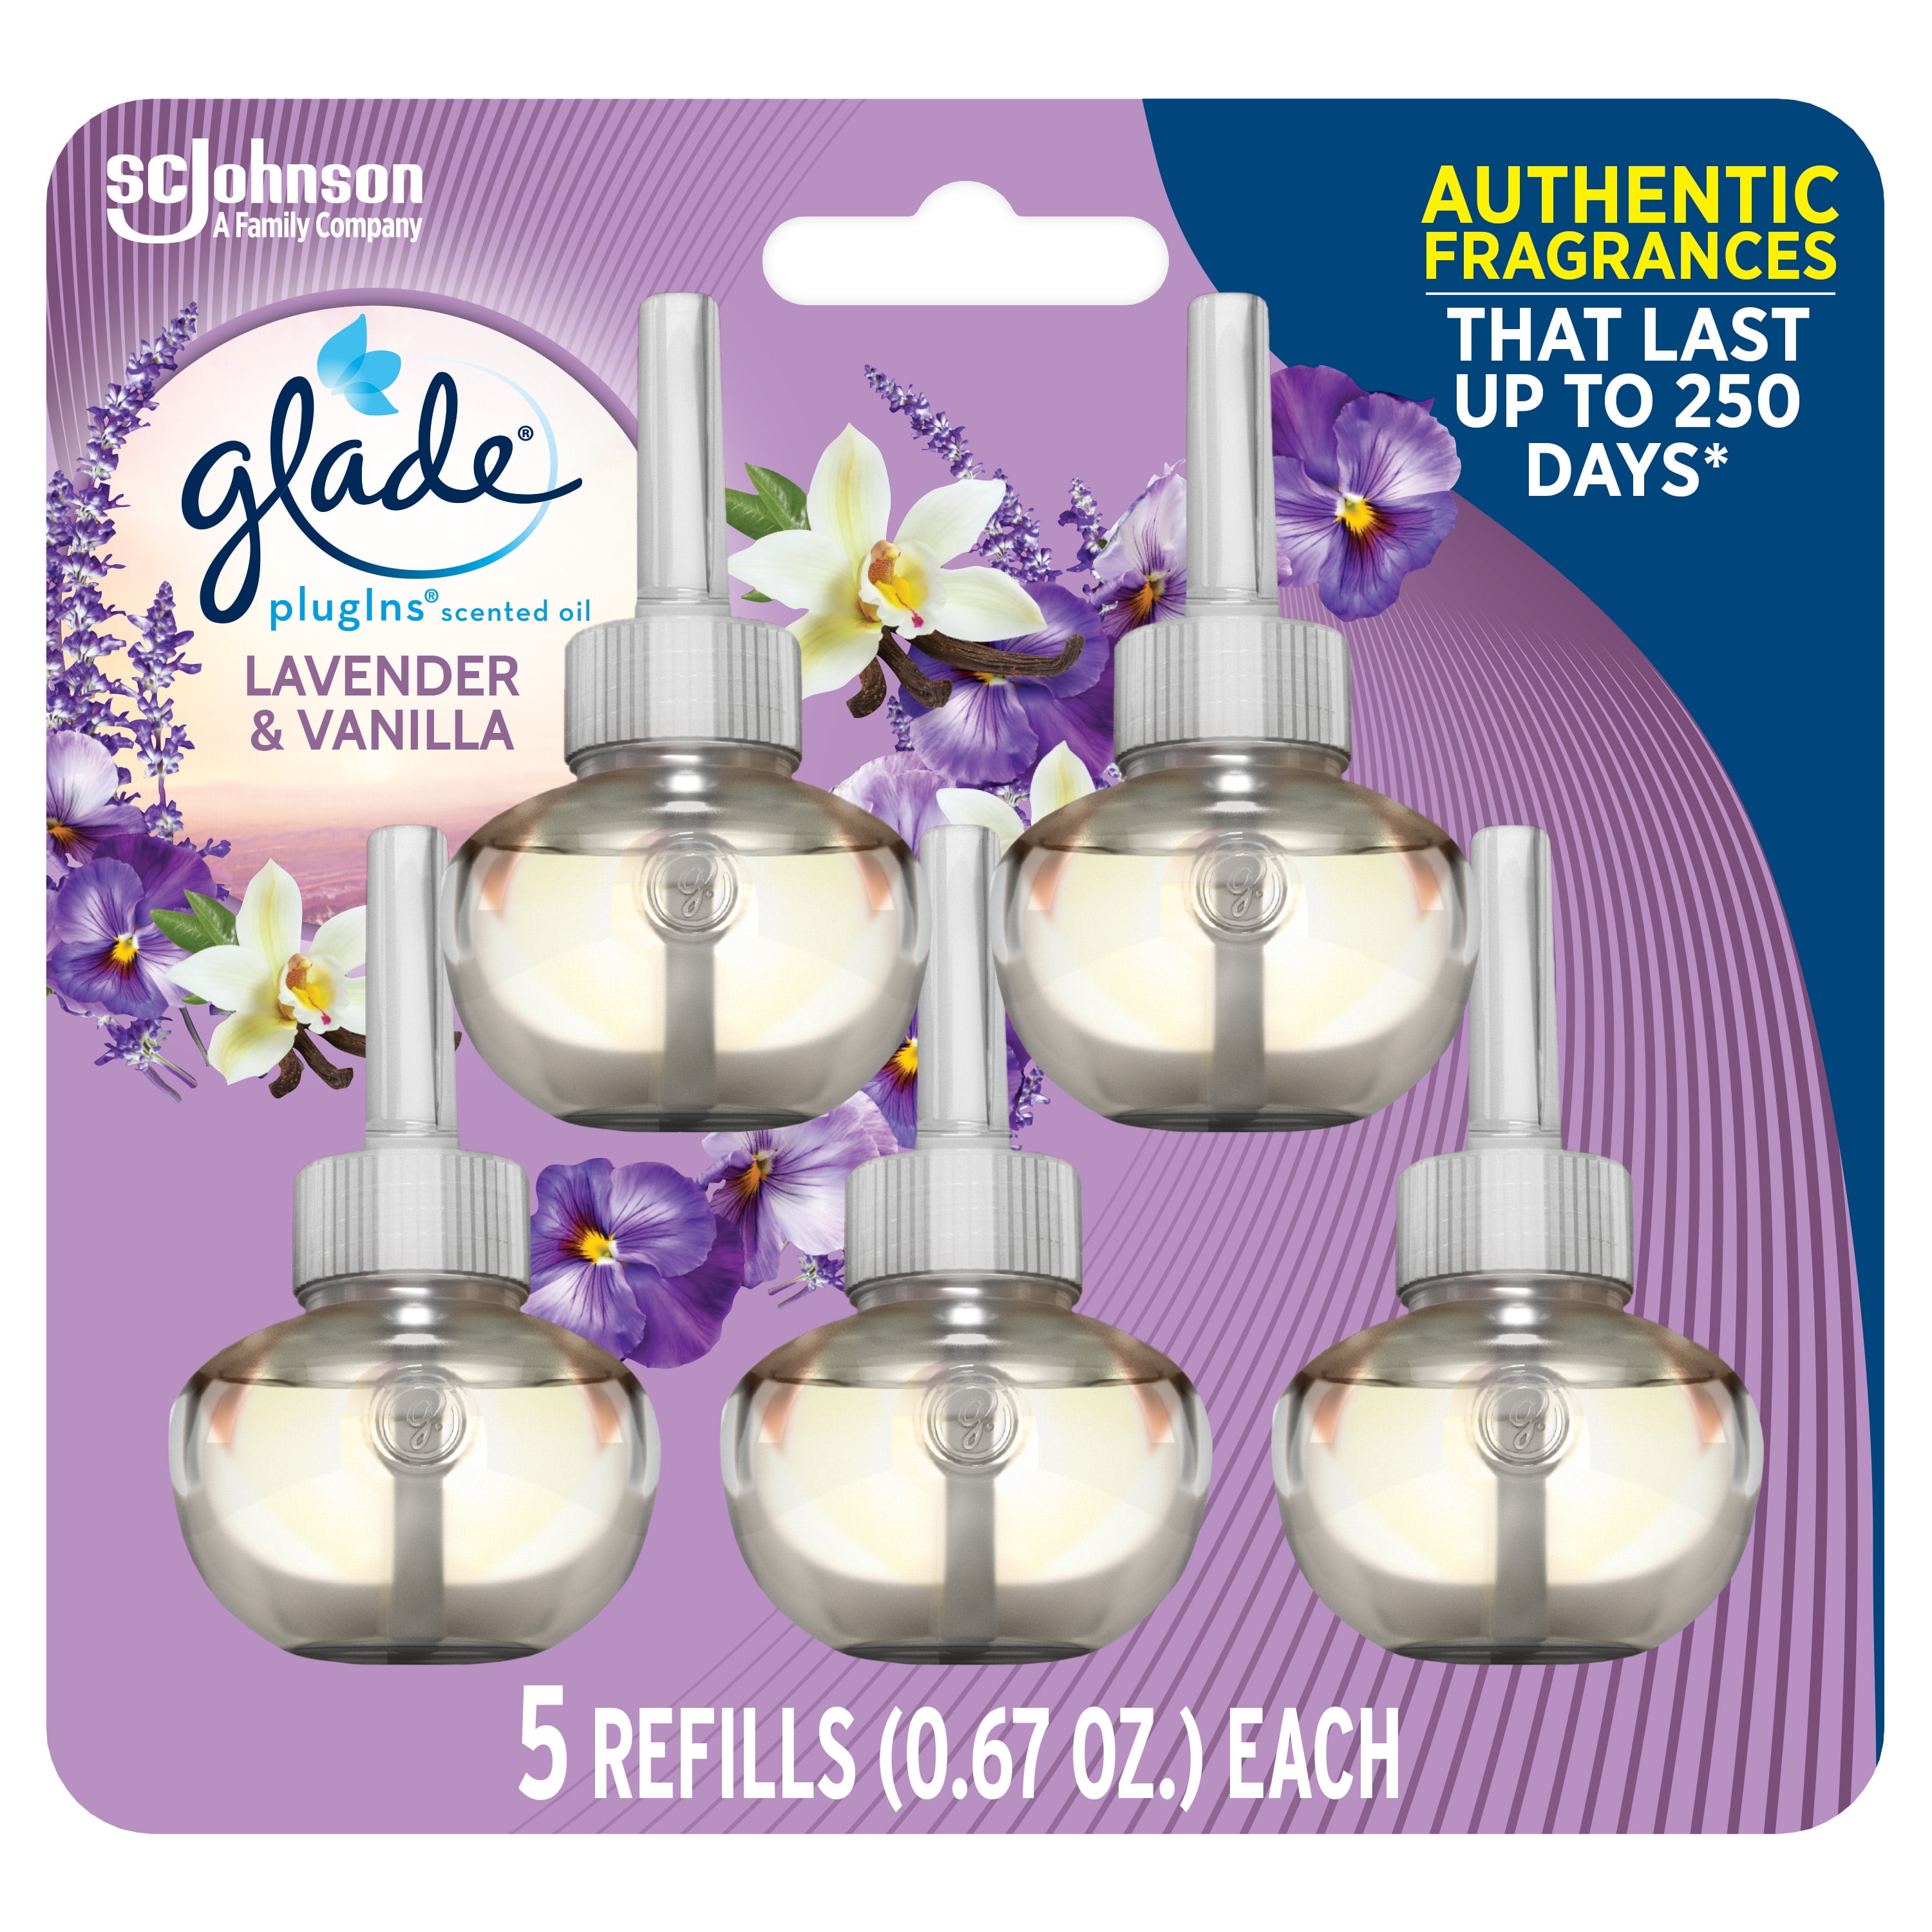 Glade PlugIns Refill 5 CT, Lavender & Vanilla, 3.35 FL. OZ. Total, Scented Oil Air Freshener Infused with Essential Oils